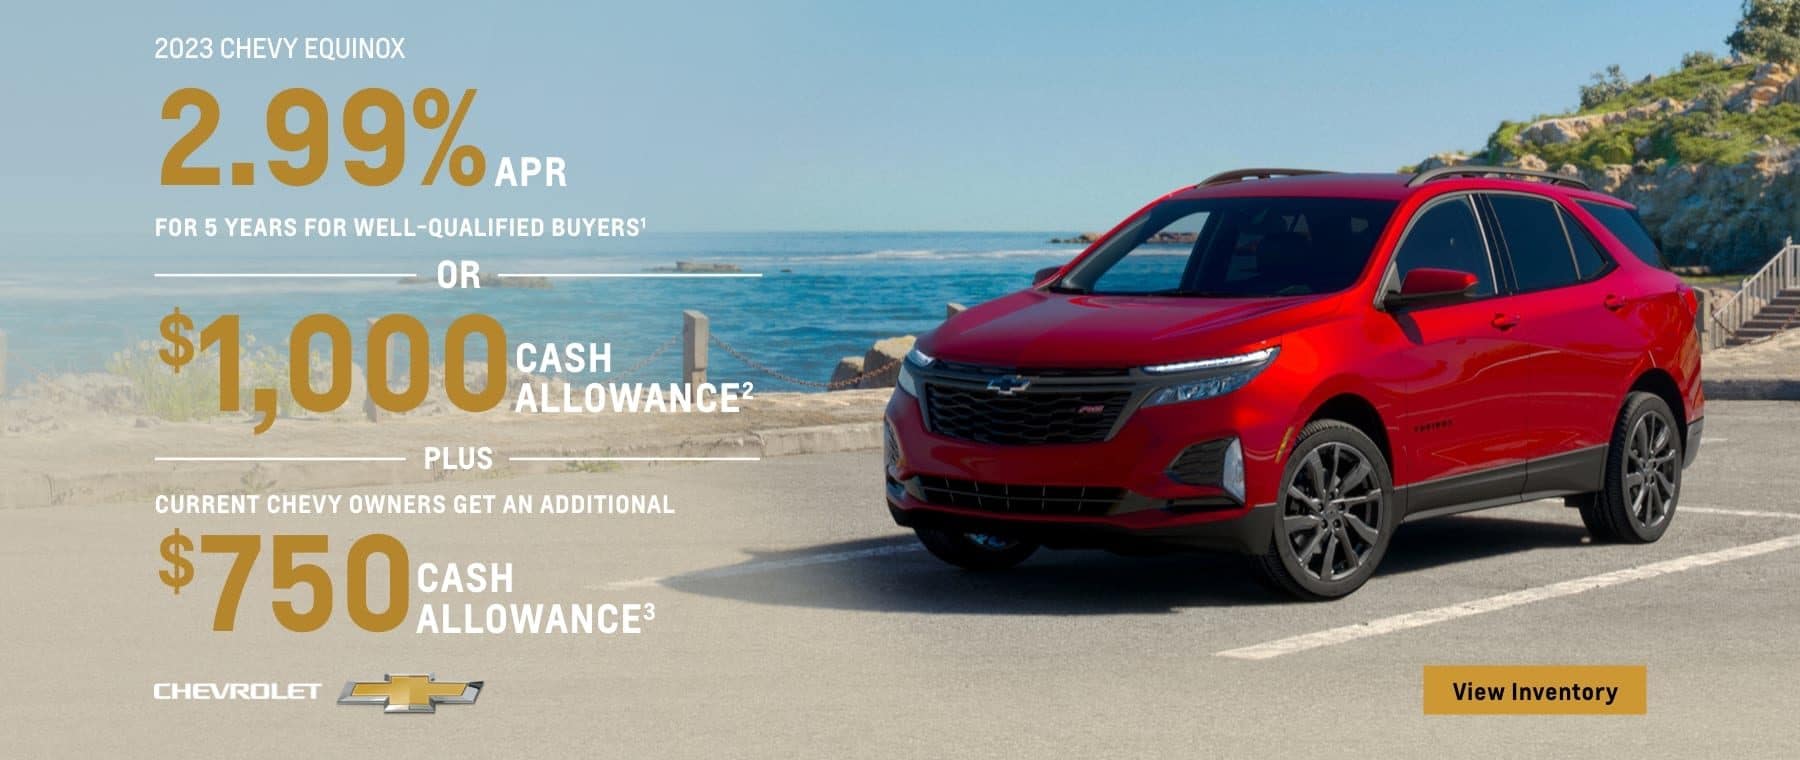 2023 Chevy Equinox. 2.99% APR for 5 years for well-qualified buyers. Or, $1,000 cash allowance. Plus, current Chevy owners get an additional $750 cash allowance.